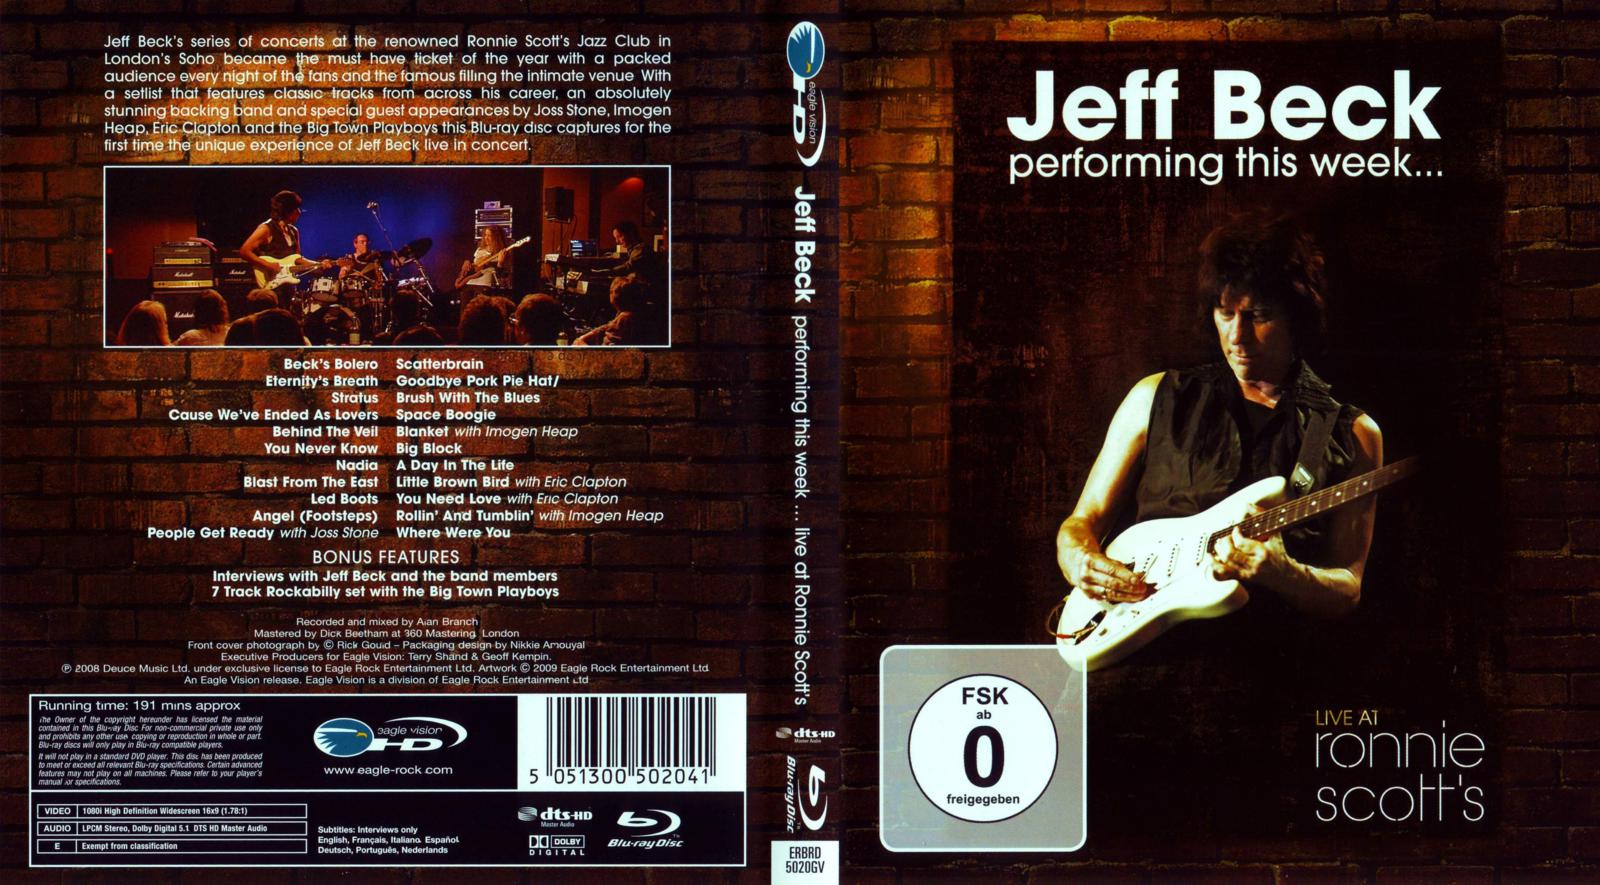 Qello Concerts Jeff Beck: Live at Ronnie Scotts Watch